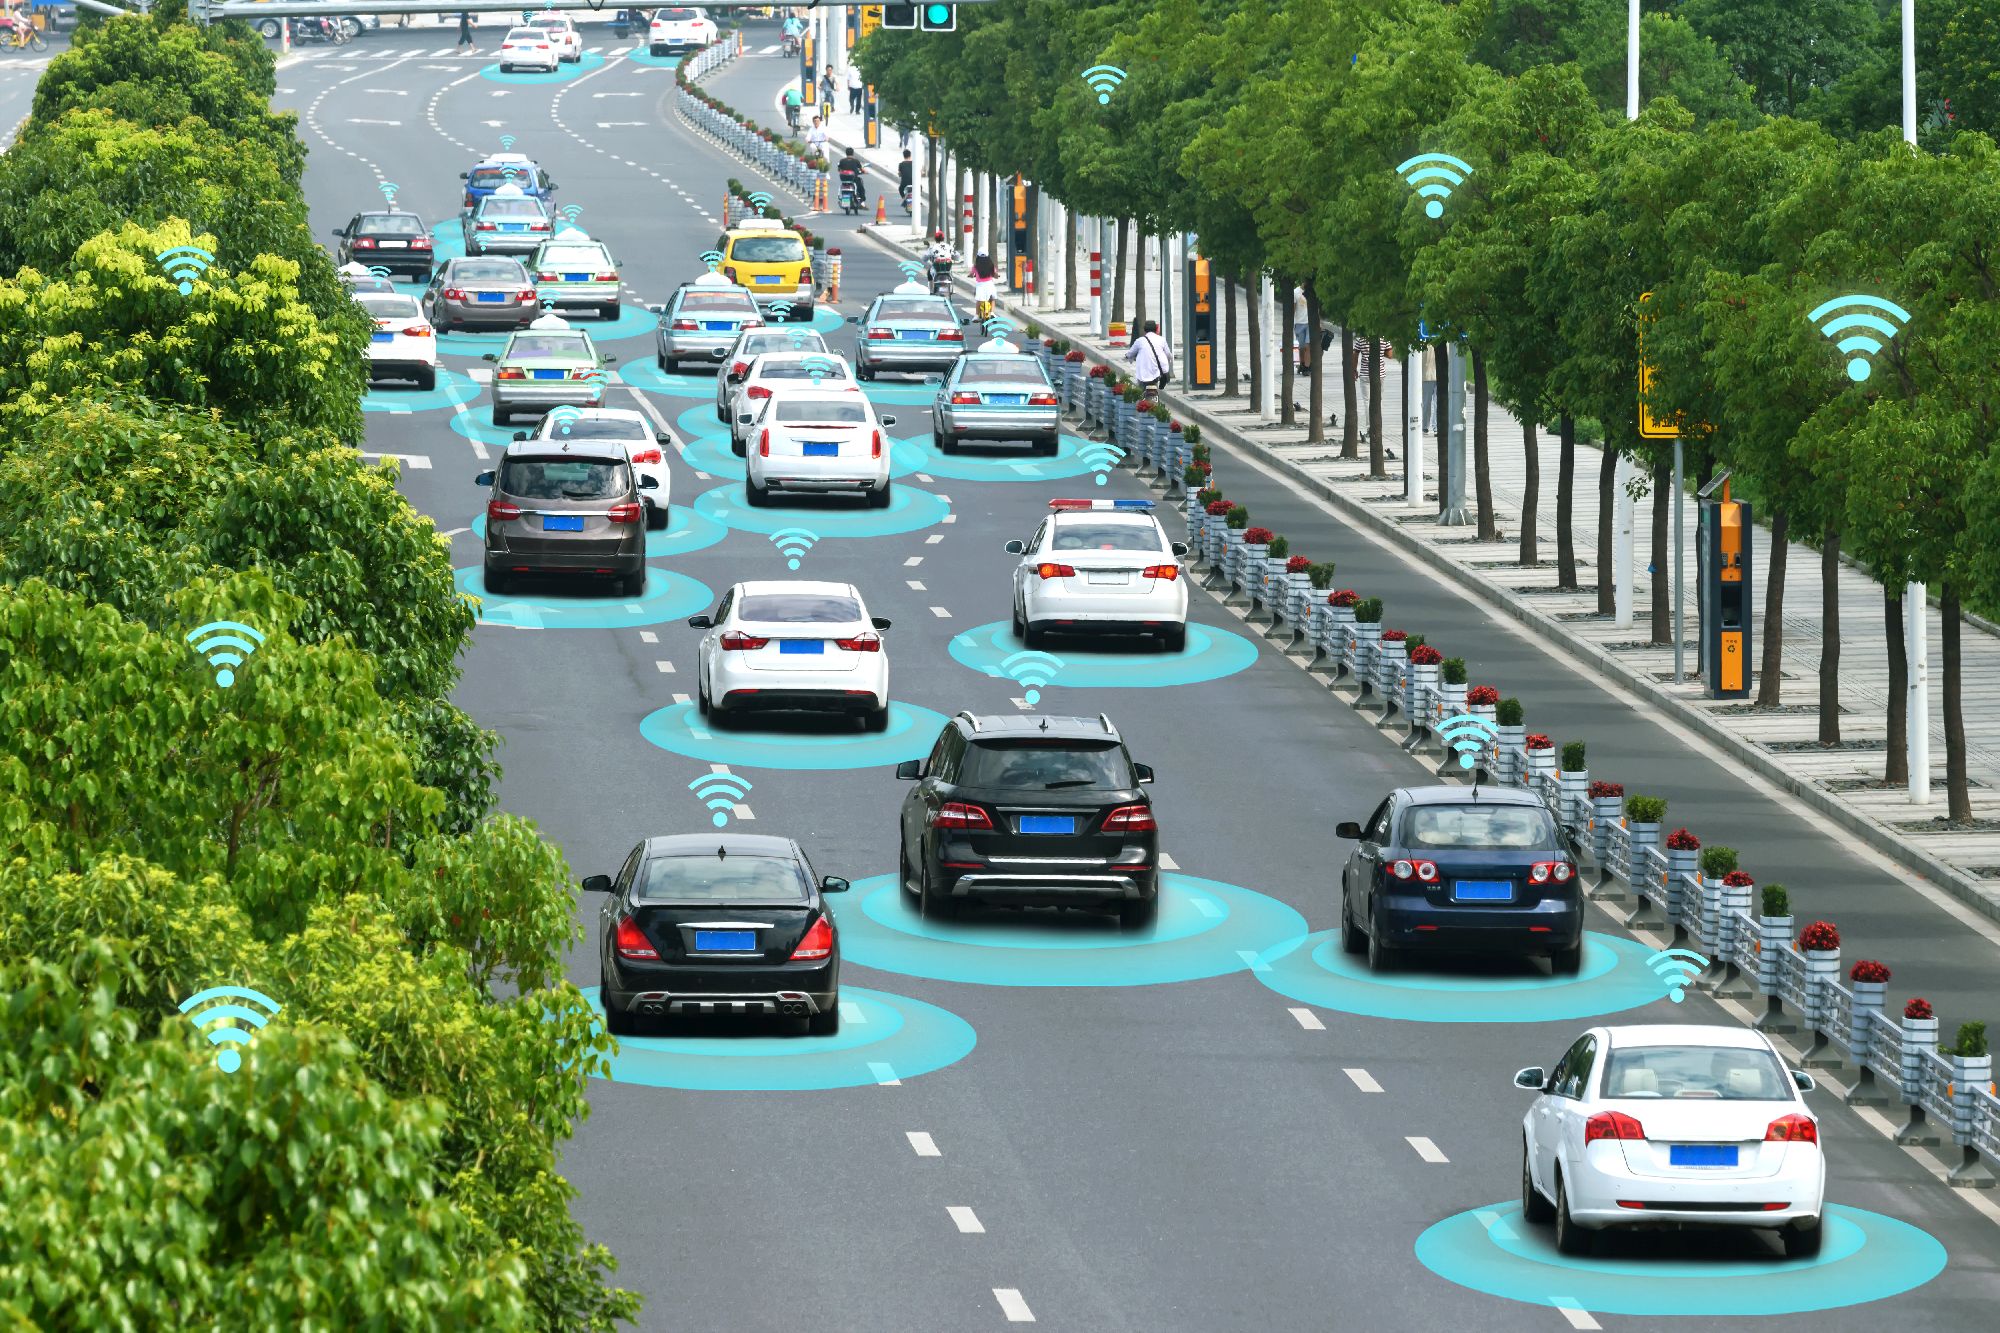 A road bordered by green trees has cars with blue circles and WiFi icons to illustrate smart autonomous technology - Innovation